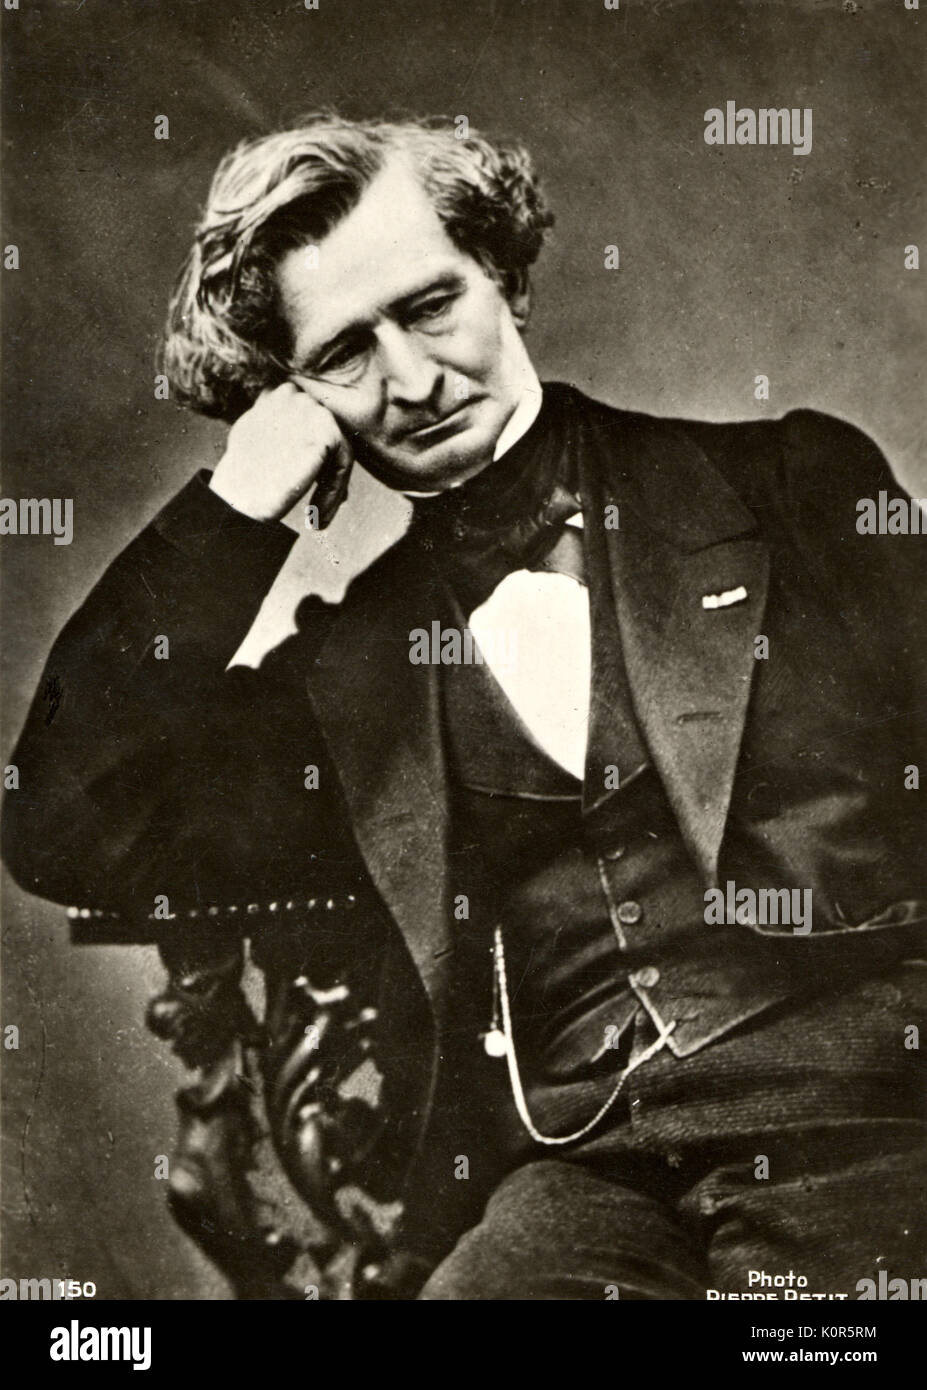 Hector  Berlioz with head leaning against hand. Photographic portrait by Pierre Petit.   French composer, 1803-1869. Stock Photo